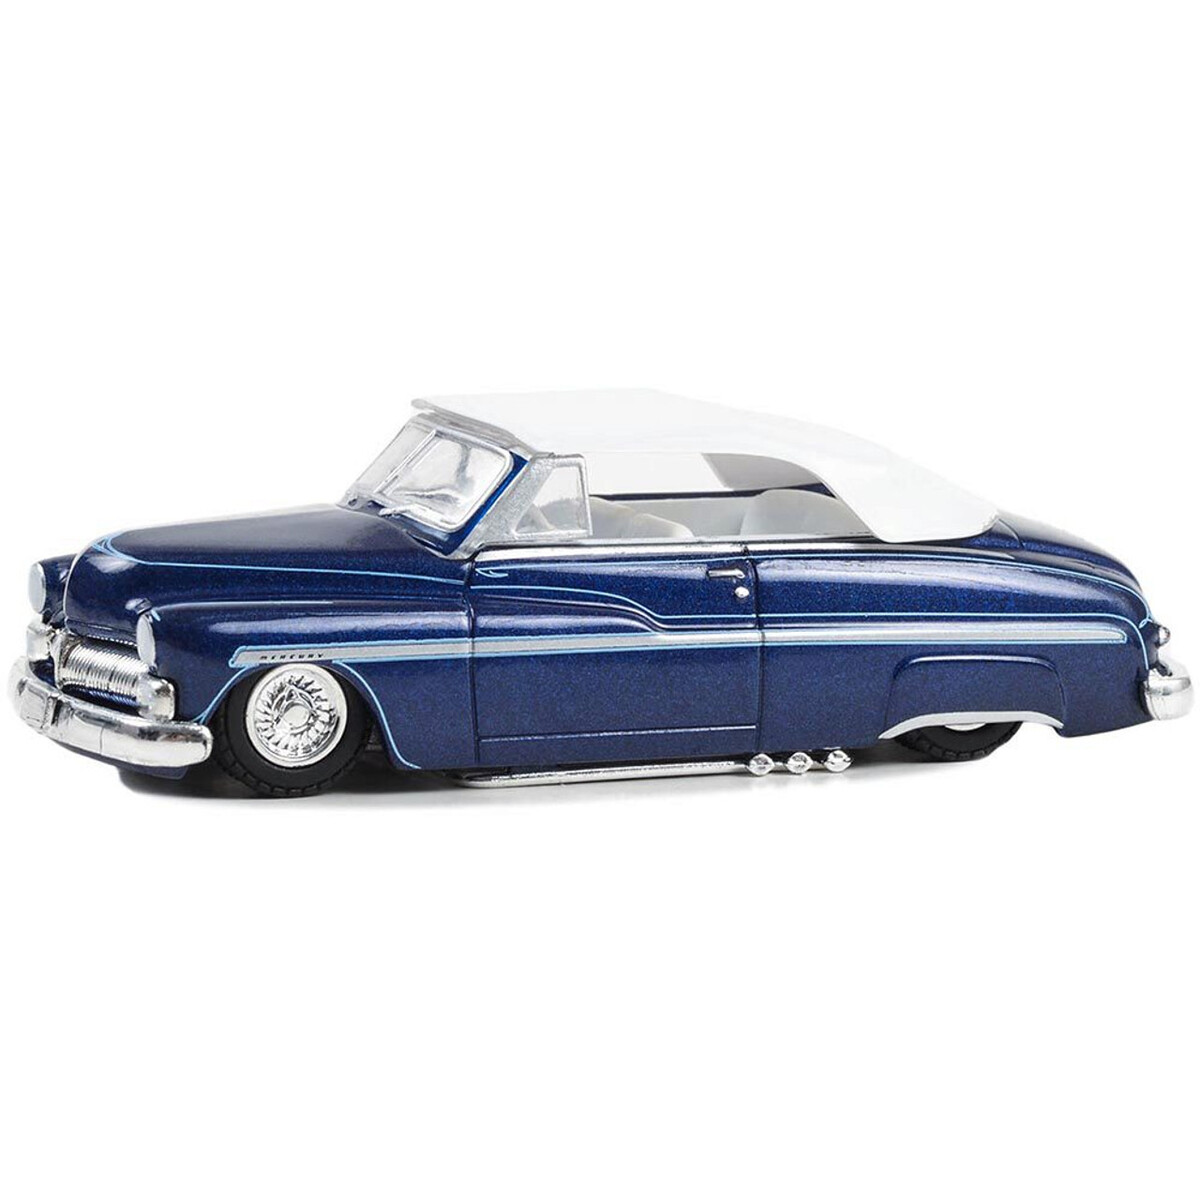 Greenlight 1/64 California Lowriders Series 4 - 1950 Mercury Eight Chopped Top Convertible - Dark Blue Metallic with Light Blue Pinstripes and White Top 63050-B - Thumbnail